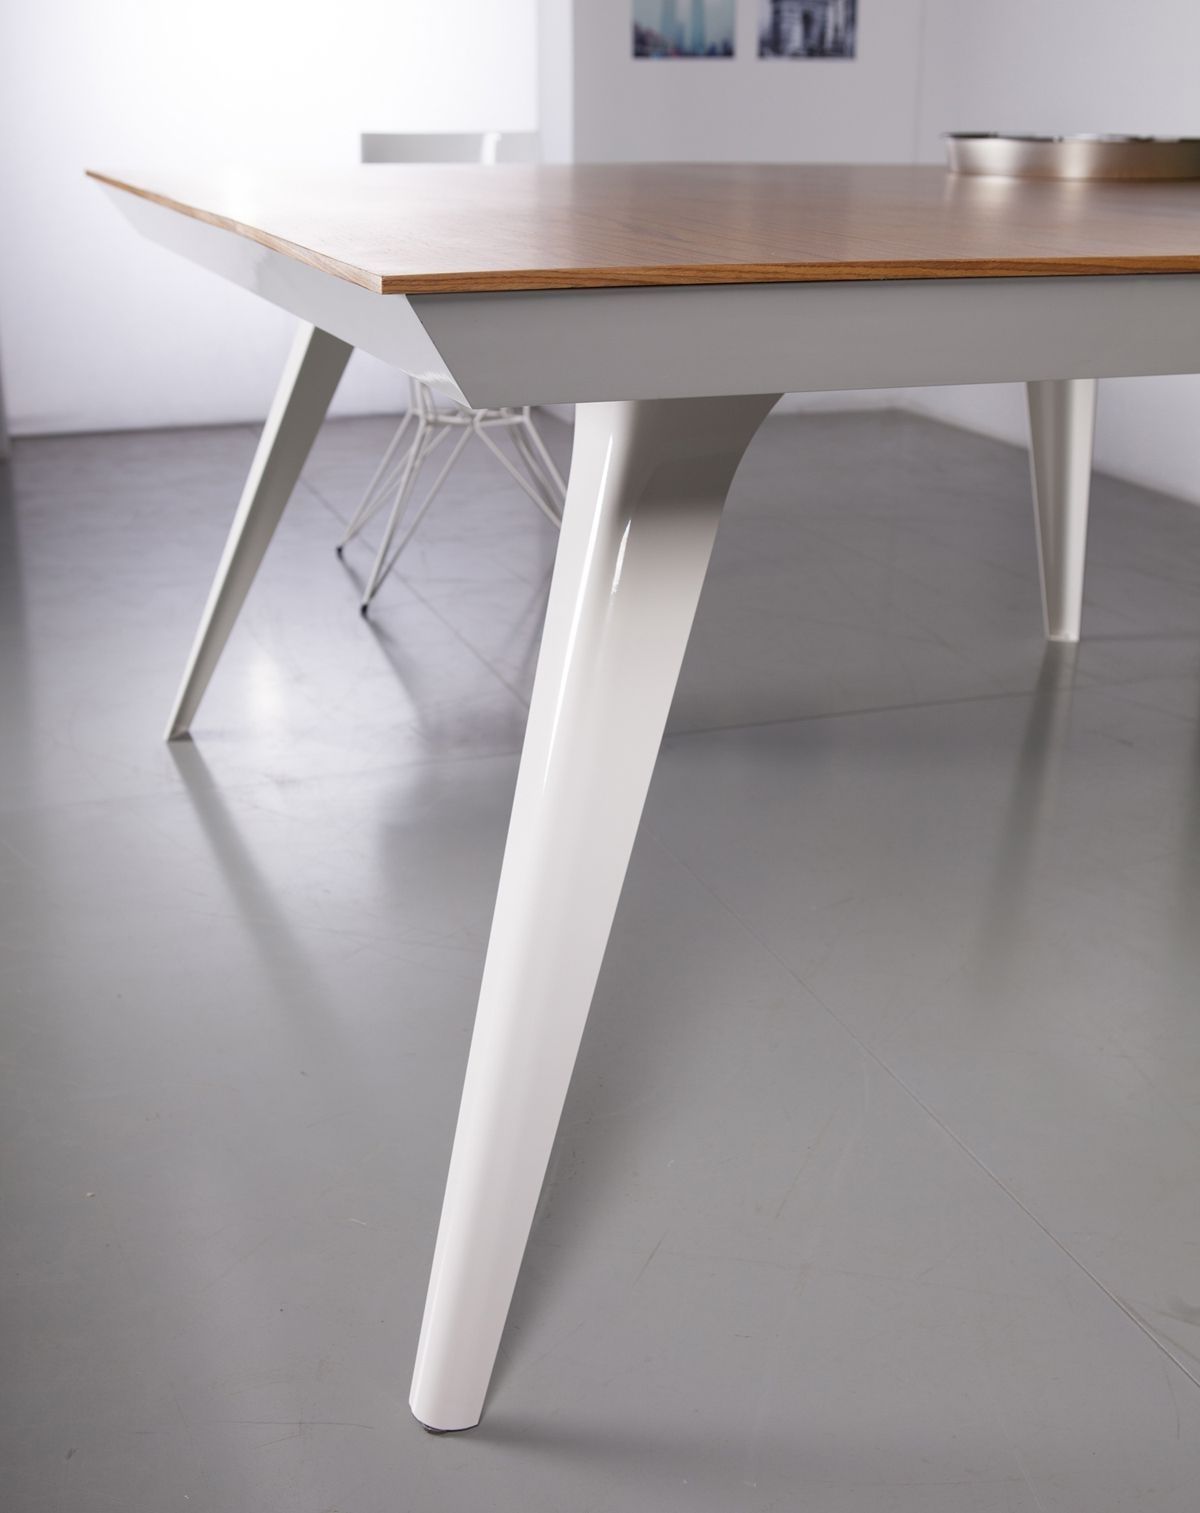 2017 Milton Dining Tables With Regard To Milton Dining Table Features A Pressure Molded Frame, Painted Laser (View 1 of 25)